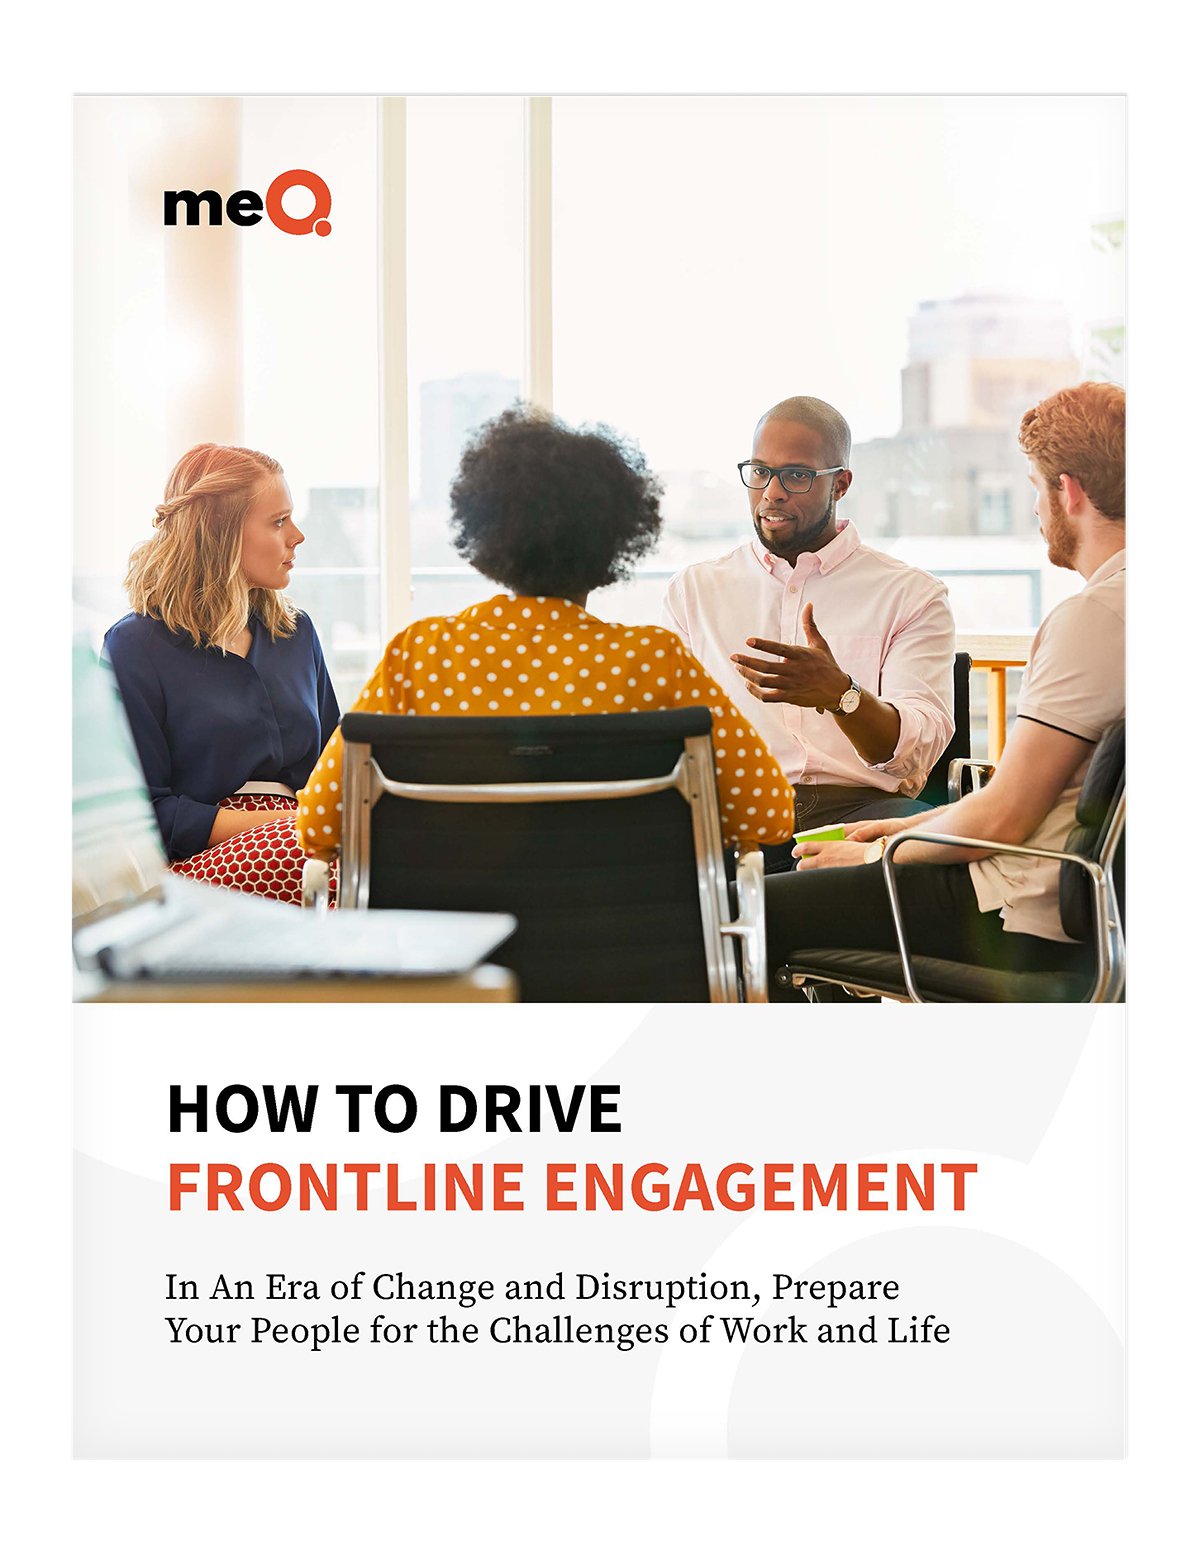 How to Drive Frontline Engagement